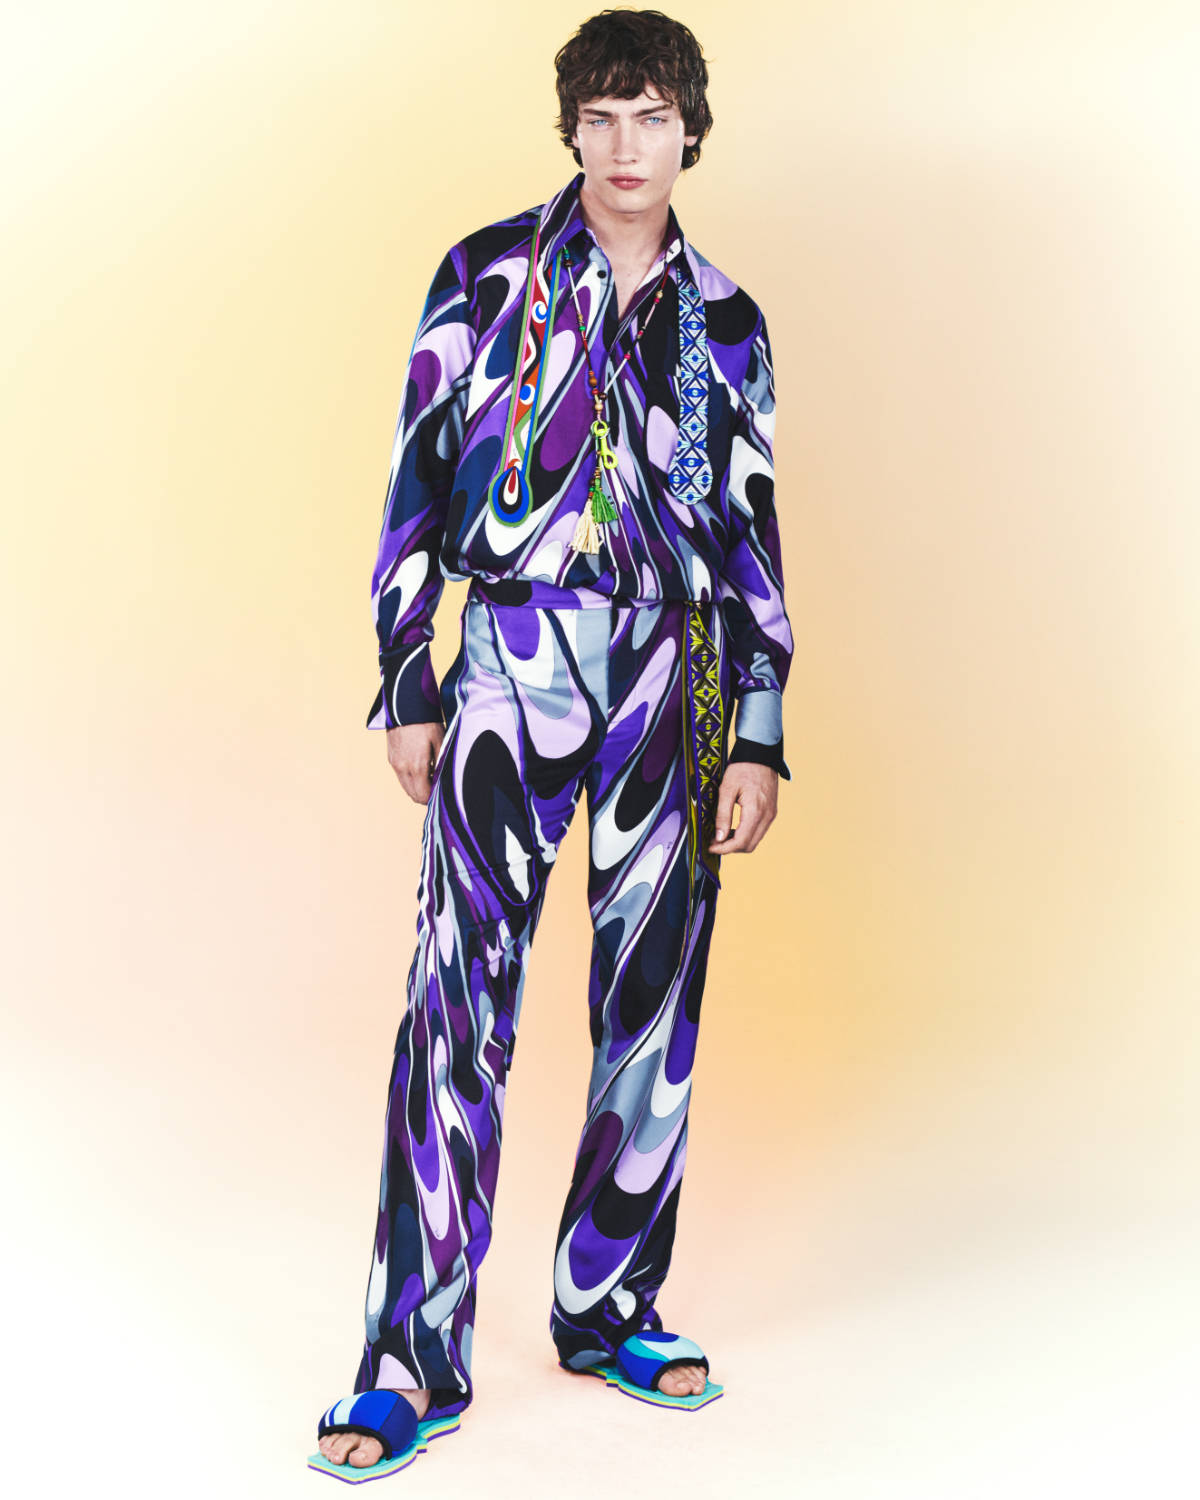 Pucci Presents Its New Spring Summer 2023 Resort Collection: La Famiglia